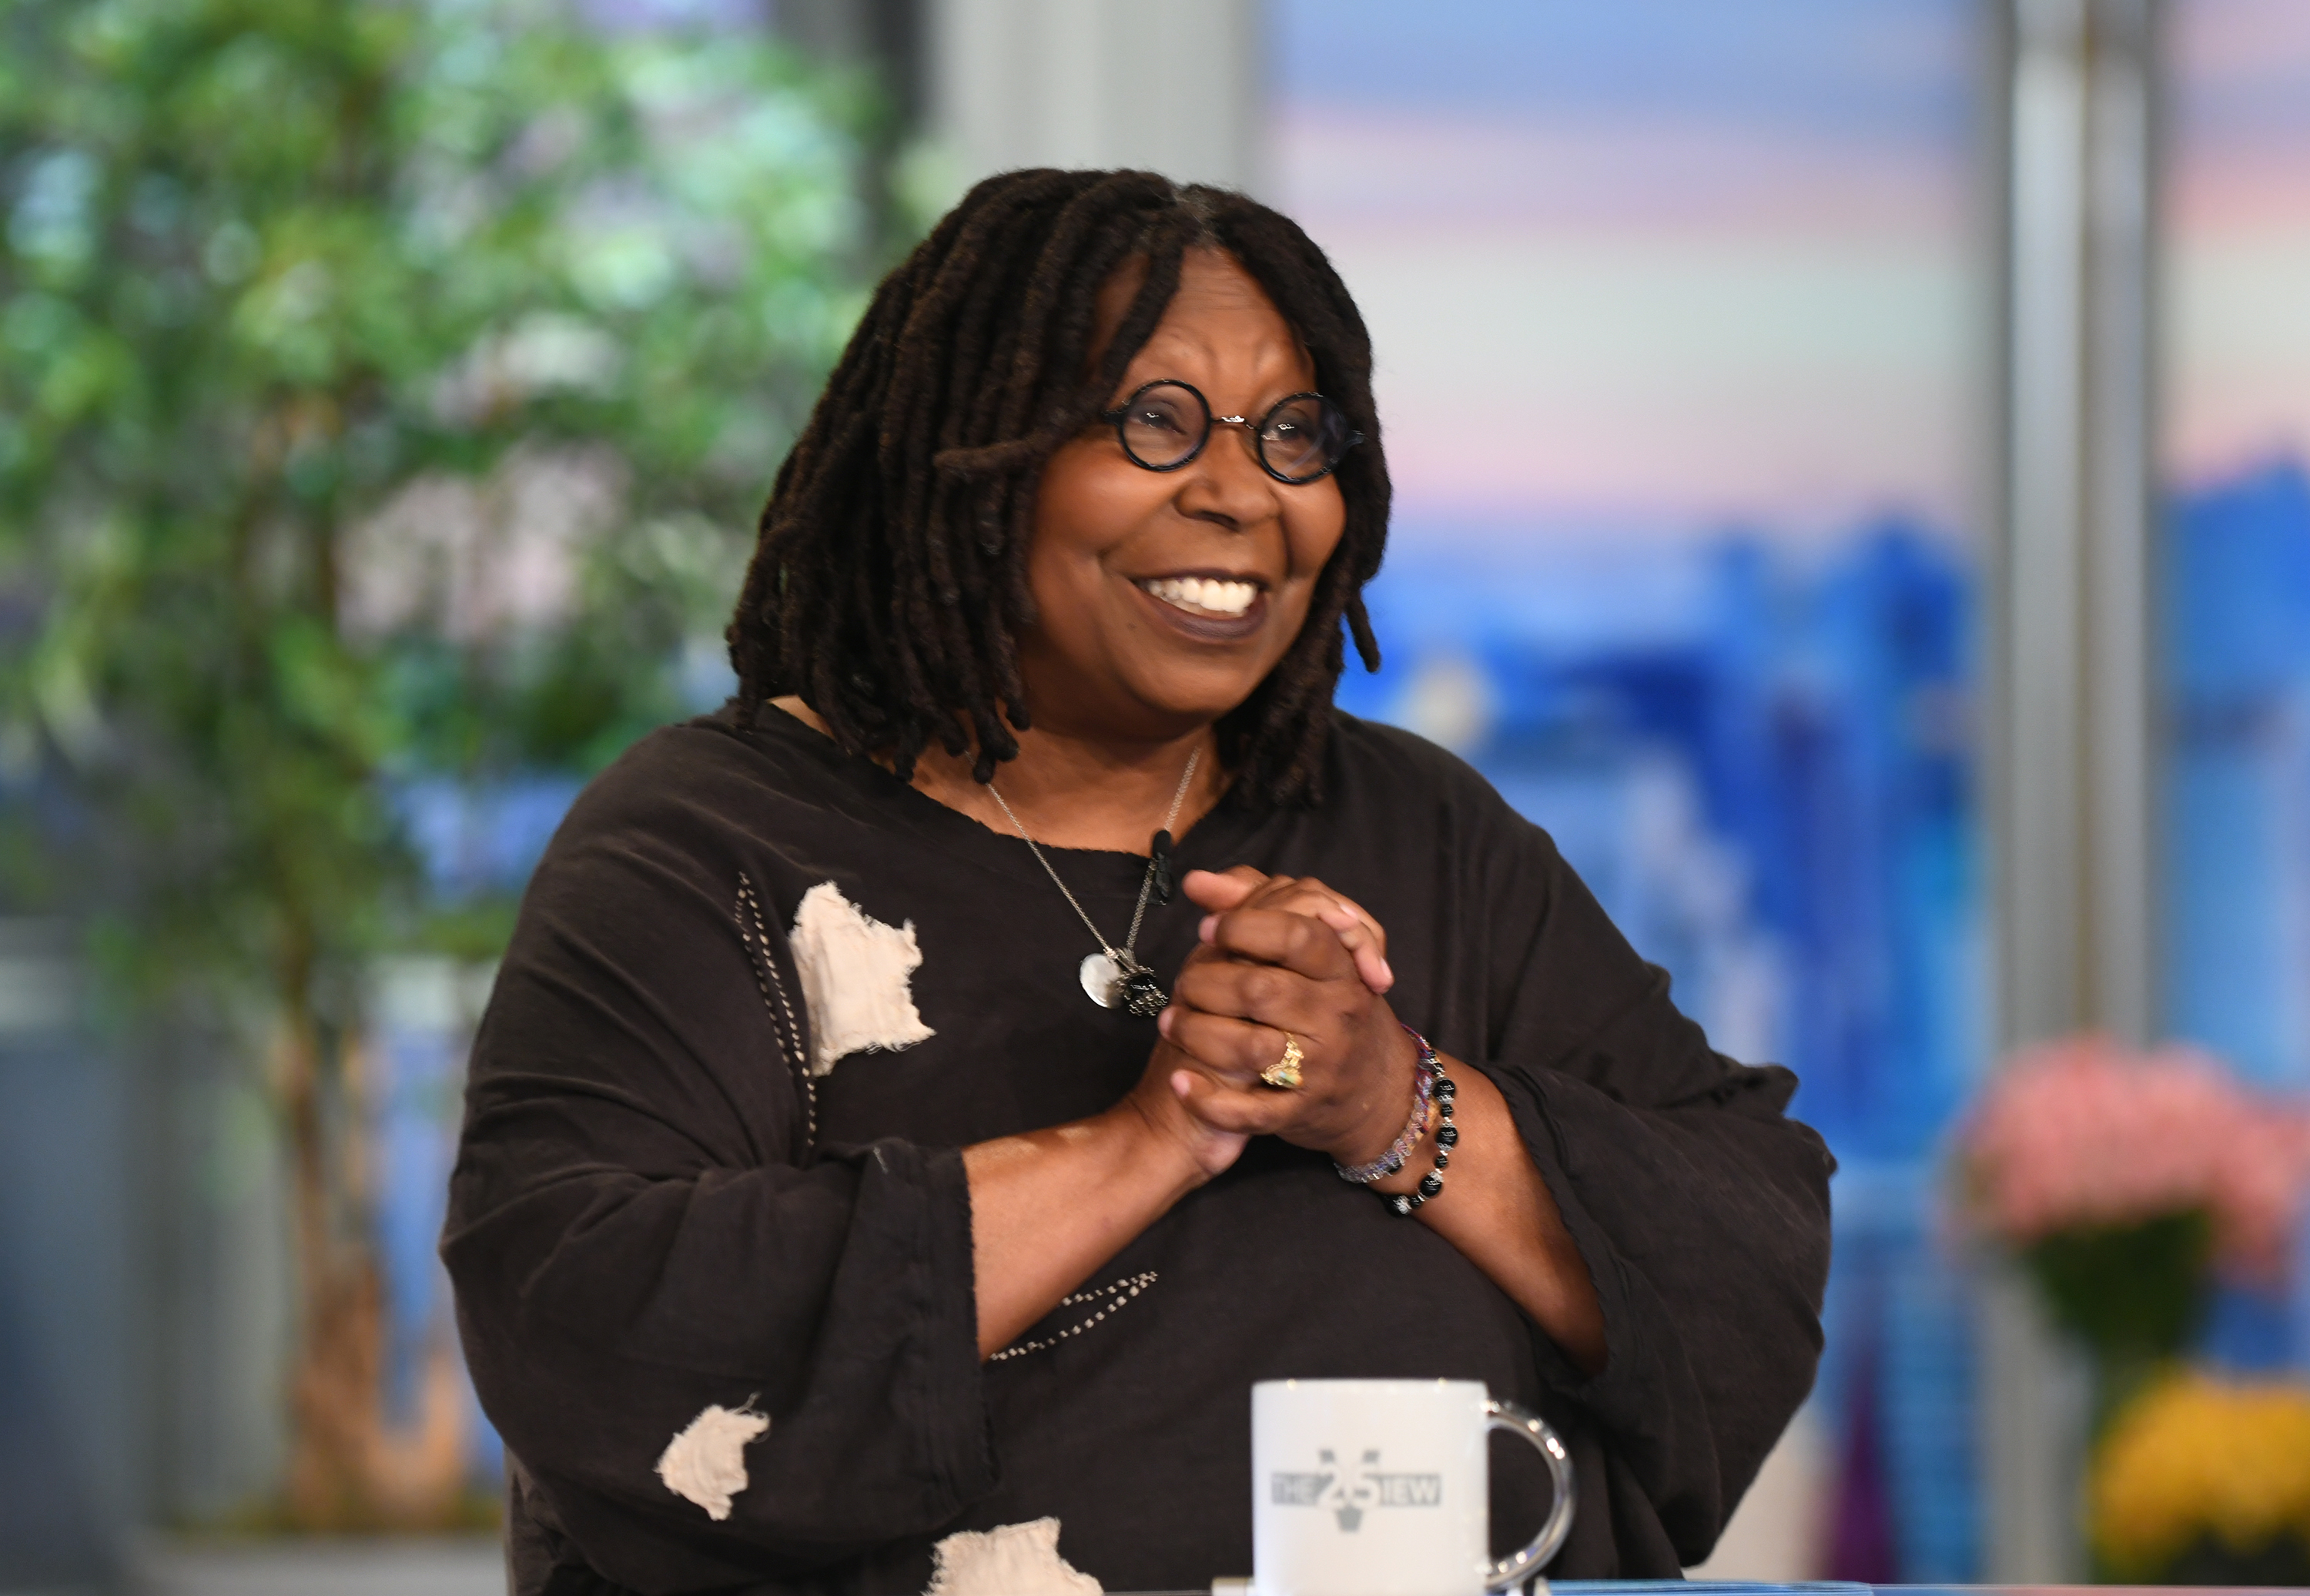 Whoopi Goldberg ist Co-Moderatorin bei "The View" am 14. September 2021 | Quelle: Getty Images